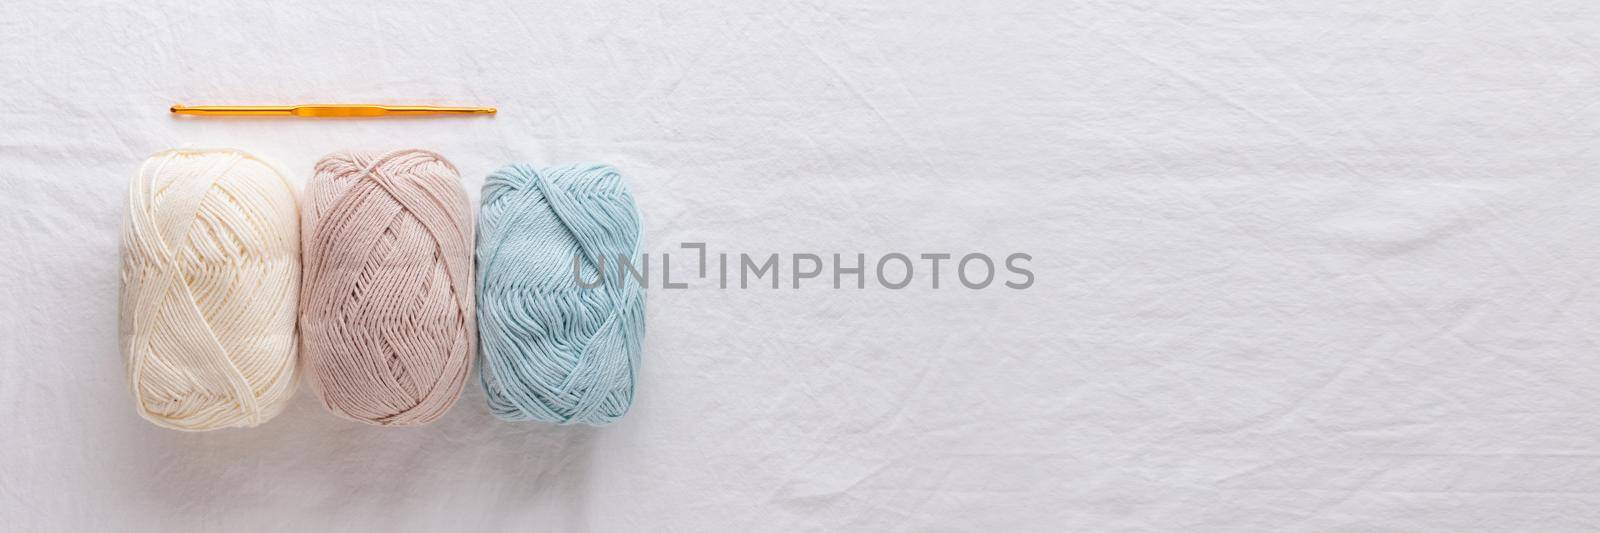 Needlework. Crochet hook and balls of cotton yarn pastel colors on a white table, copy space